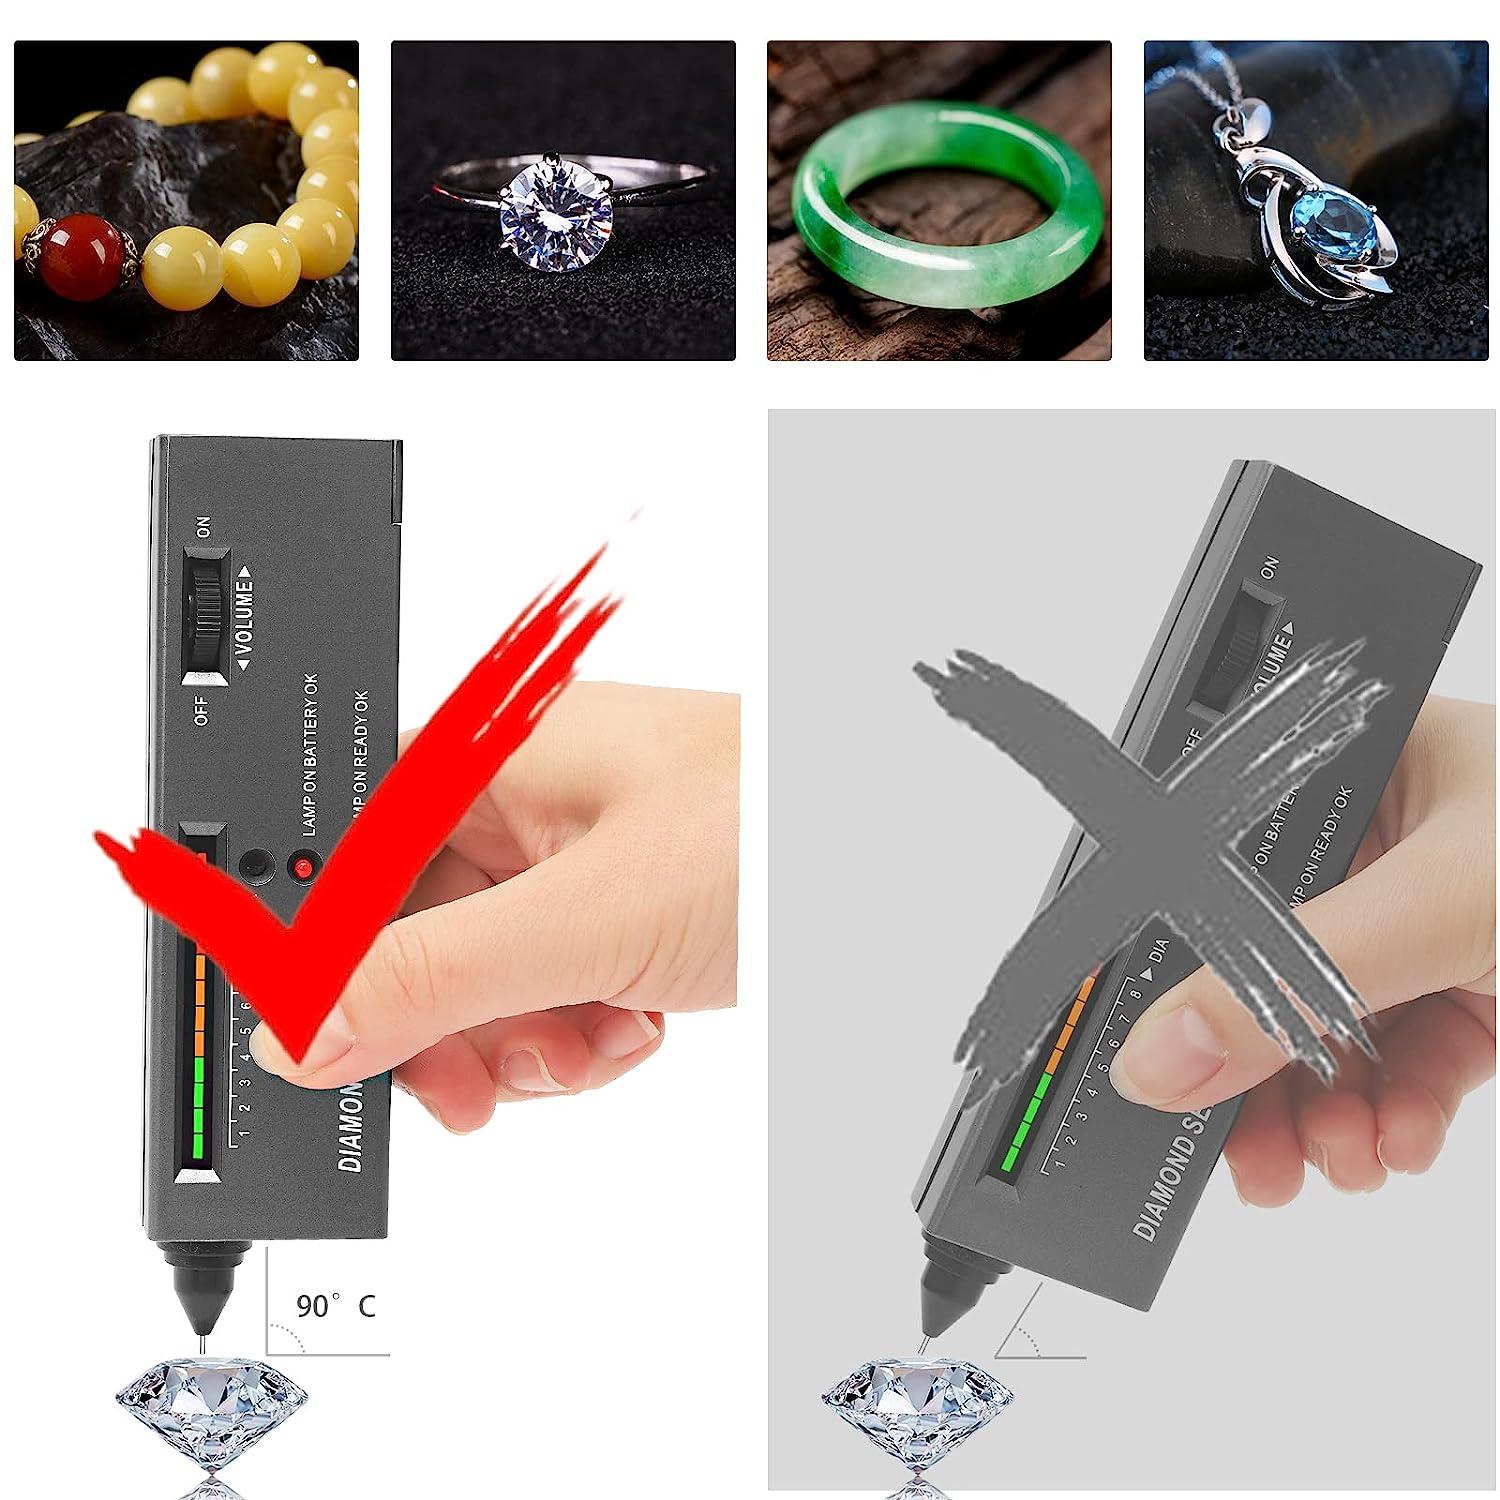 Diamond Tester High Accuracy Portable Gem Tester Jeweler Test Tool with LED  Indicator (Battery not included) 